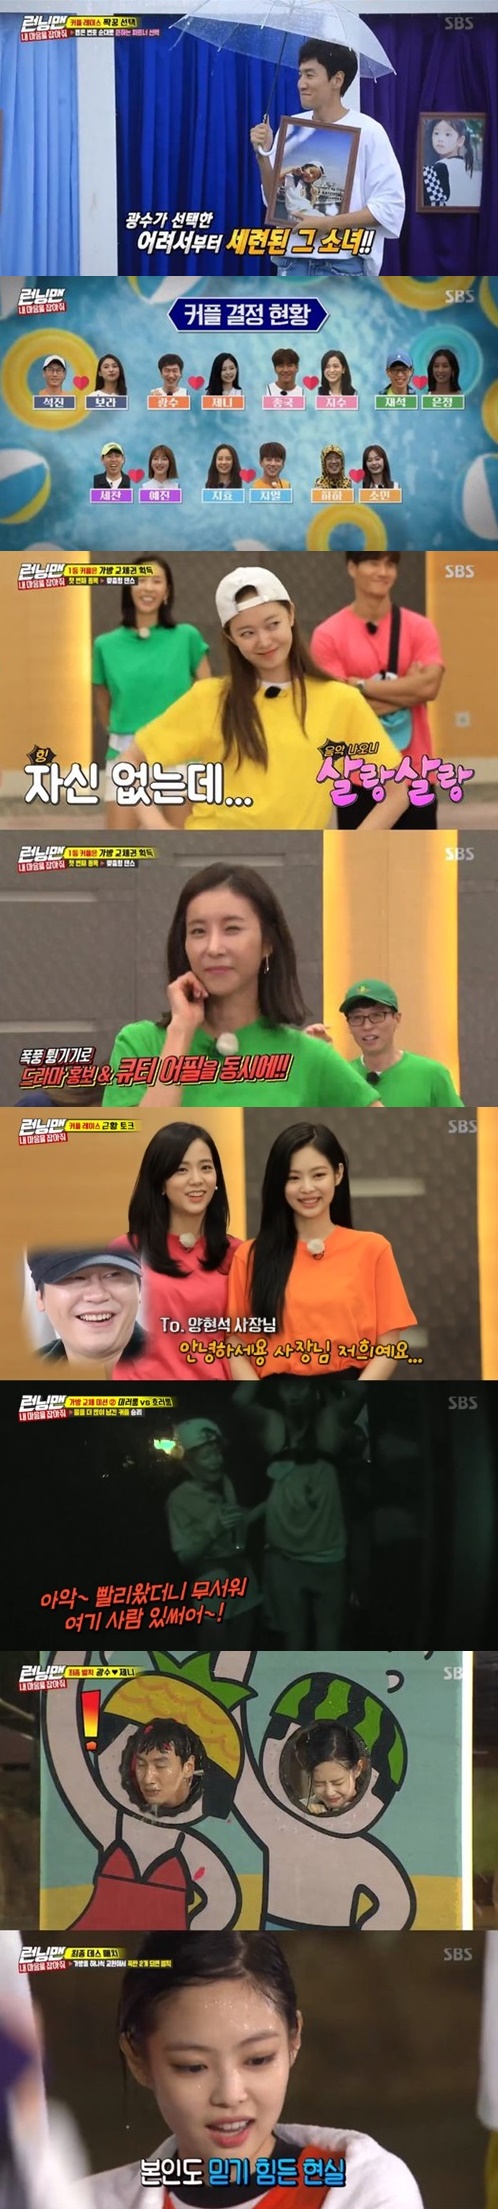 SBS Running Man swept the real-time search rankings and ranked first in the same time zone of 2049 ratings for 6 consecutive weeks.According to Nielsen Korea, the ratings agency Running Man, which aired on July 15, recorded 4.1% of target audience ratings (based on households in the Seoul metropolitan area) between 20 and 49 years old (hereinafter referred to as 2049), which is considered an important indicator of major advertising officials, beating Happy Sunday (3.3%) and Masked Wang (2.9%) which were broadcast during the same time period.The show was decorated with a couple Race Get My Heart at Blackwater Park for the summer.Actor Han Eun-jung, BLACKPINK Jenny Kim, JiSoo, Pyo Ye-jin, Bora, Singer Hwang Chi-yeol appeared as guests and paired with the members and performed a pleasant race.In particular, Jenny Kim and JiSoo have been on the real-time search terms of major portal sites, among which Jenny Kim has attracted attention.Jenny Kim, who appeared shyly for the first time, started the car with the first place in the three-way poetry, and unlike the first appearance of self in the Blackwater Park Hoorroom experience, she laughed and laughed.In the end, Lee Kwang-soo, a partner, showed a great deal of guest-going.Jenny Kim also shone in the experience of the rides that followed.Fearing to ride, Jenny Kim said that the ride was more fun than she thought, and that she was hit once more to her partner Lee Kwang-soo, and she was completely different from the stage.In addition, Jenny Kim was also noted as a New Blow.The Jenny Kim X Lee Kwang-soo couple played the right match with the Pyo Ye-jin - Yang Se-chan couple and was given the opportunity to set fate for Jenny Kim.The odds were 50 percent, but Jenny Kim chose the last of her own with her signature bang-on energy.Eventually, Lee Kwang-soo - Jenny Kim couple received a water balloon penalty, and the scene rose to the highest audience rating of 8.3% at the moment, winning the best one minute.hwang hye-jin